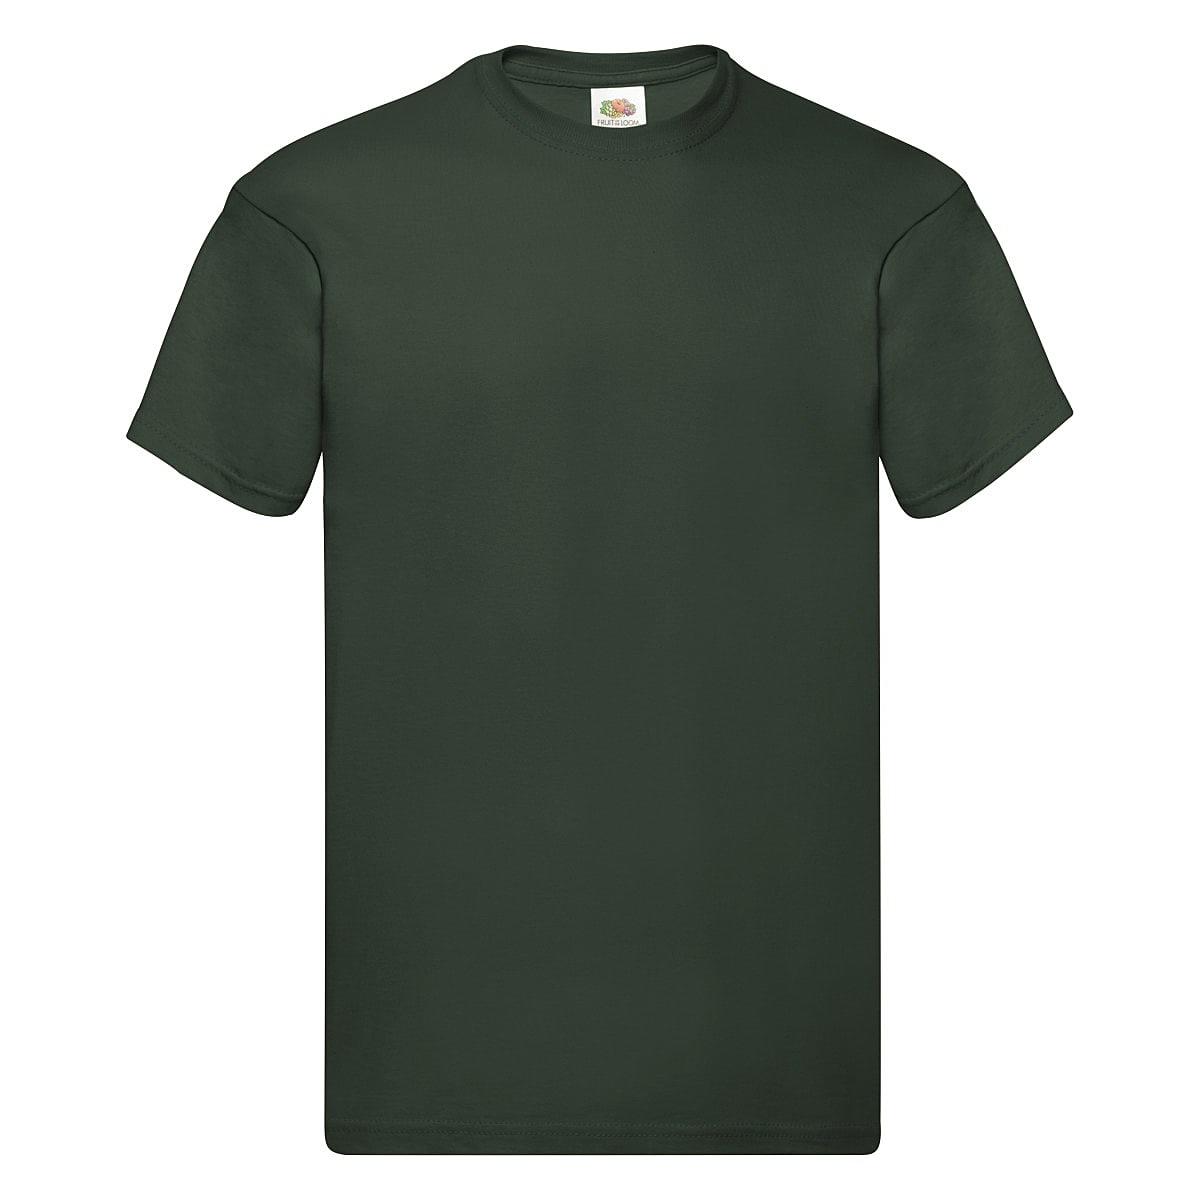 Fruit Of The Loom Original Full Cut T-Shirt in Bottle Green (Product Code: 61082)